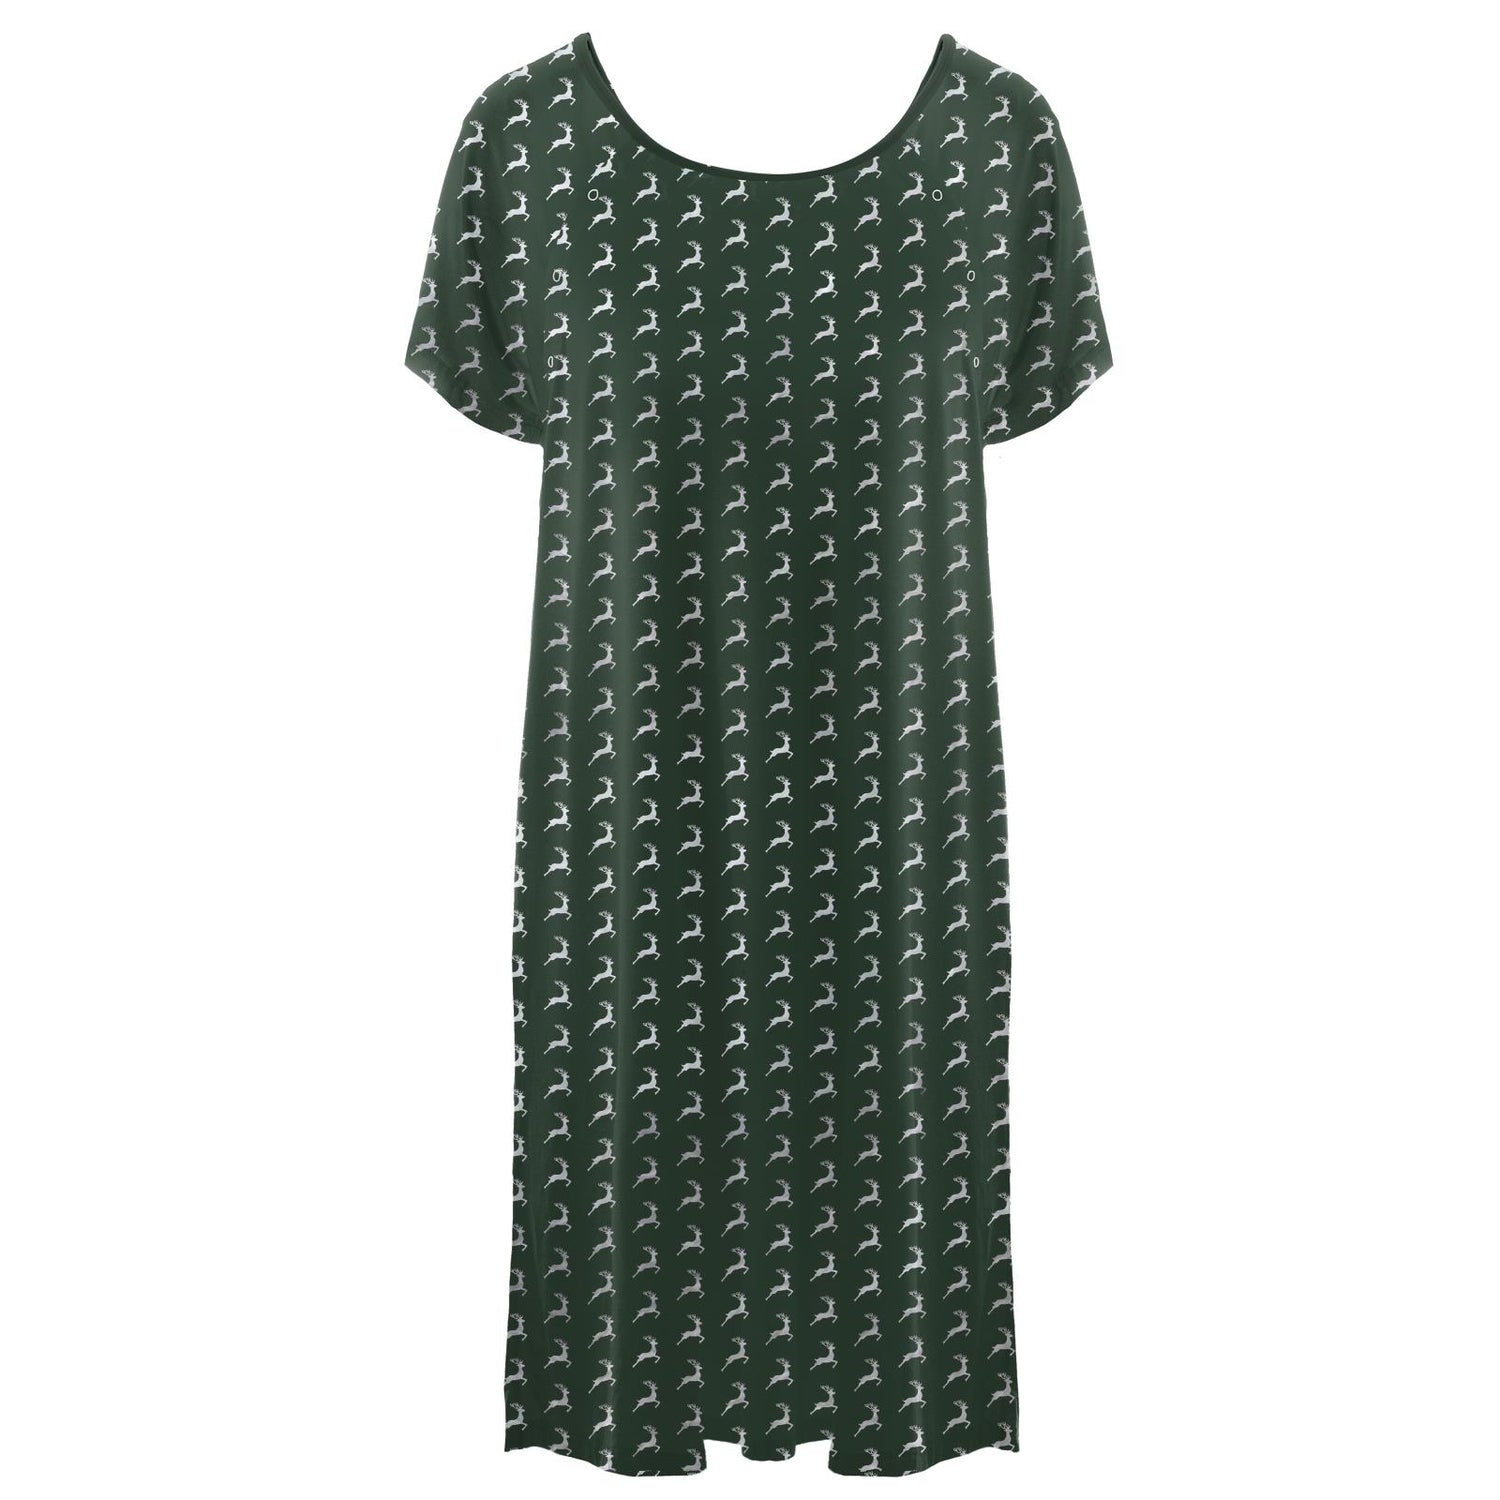 Women's Print Hospital Gown in Mountain View Reindeer